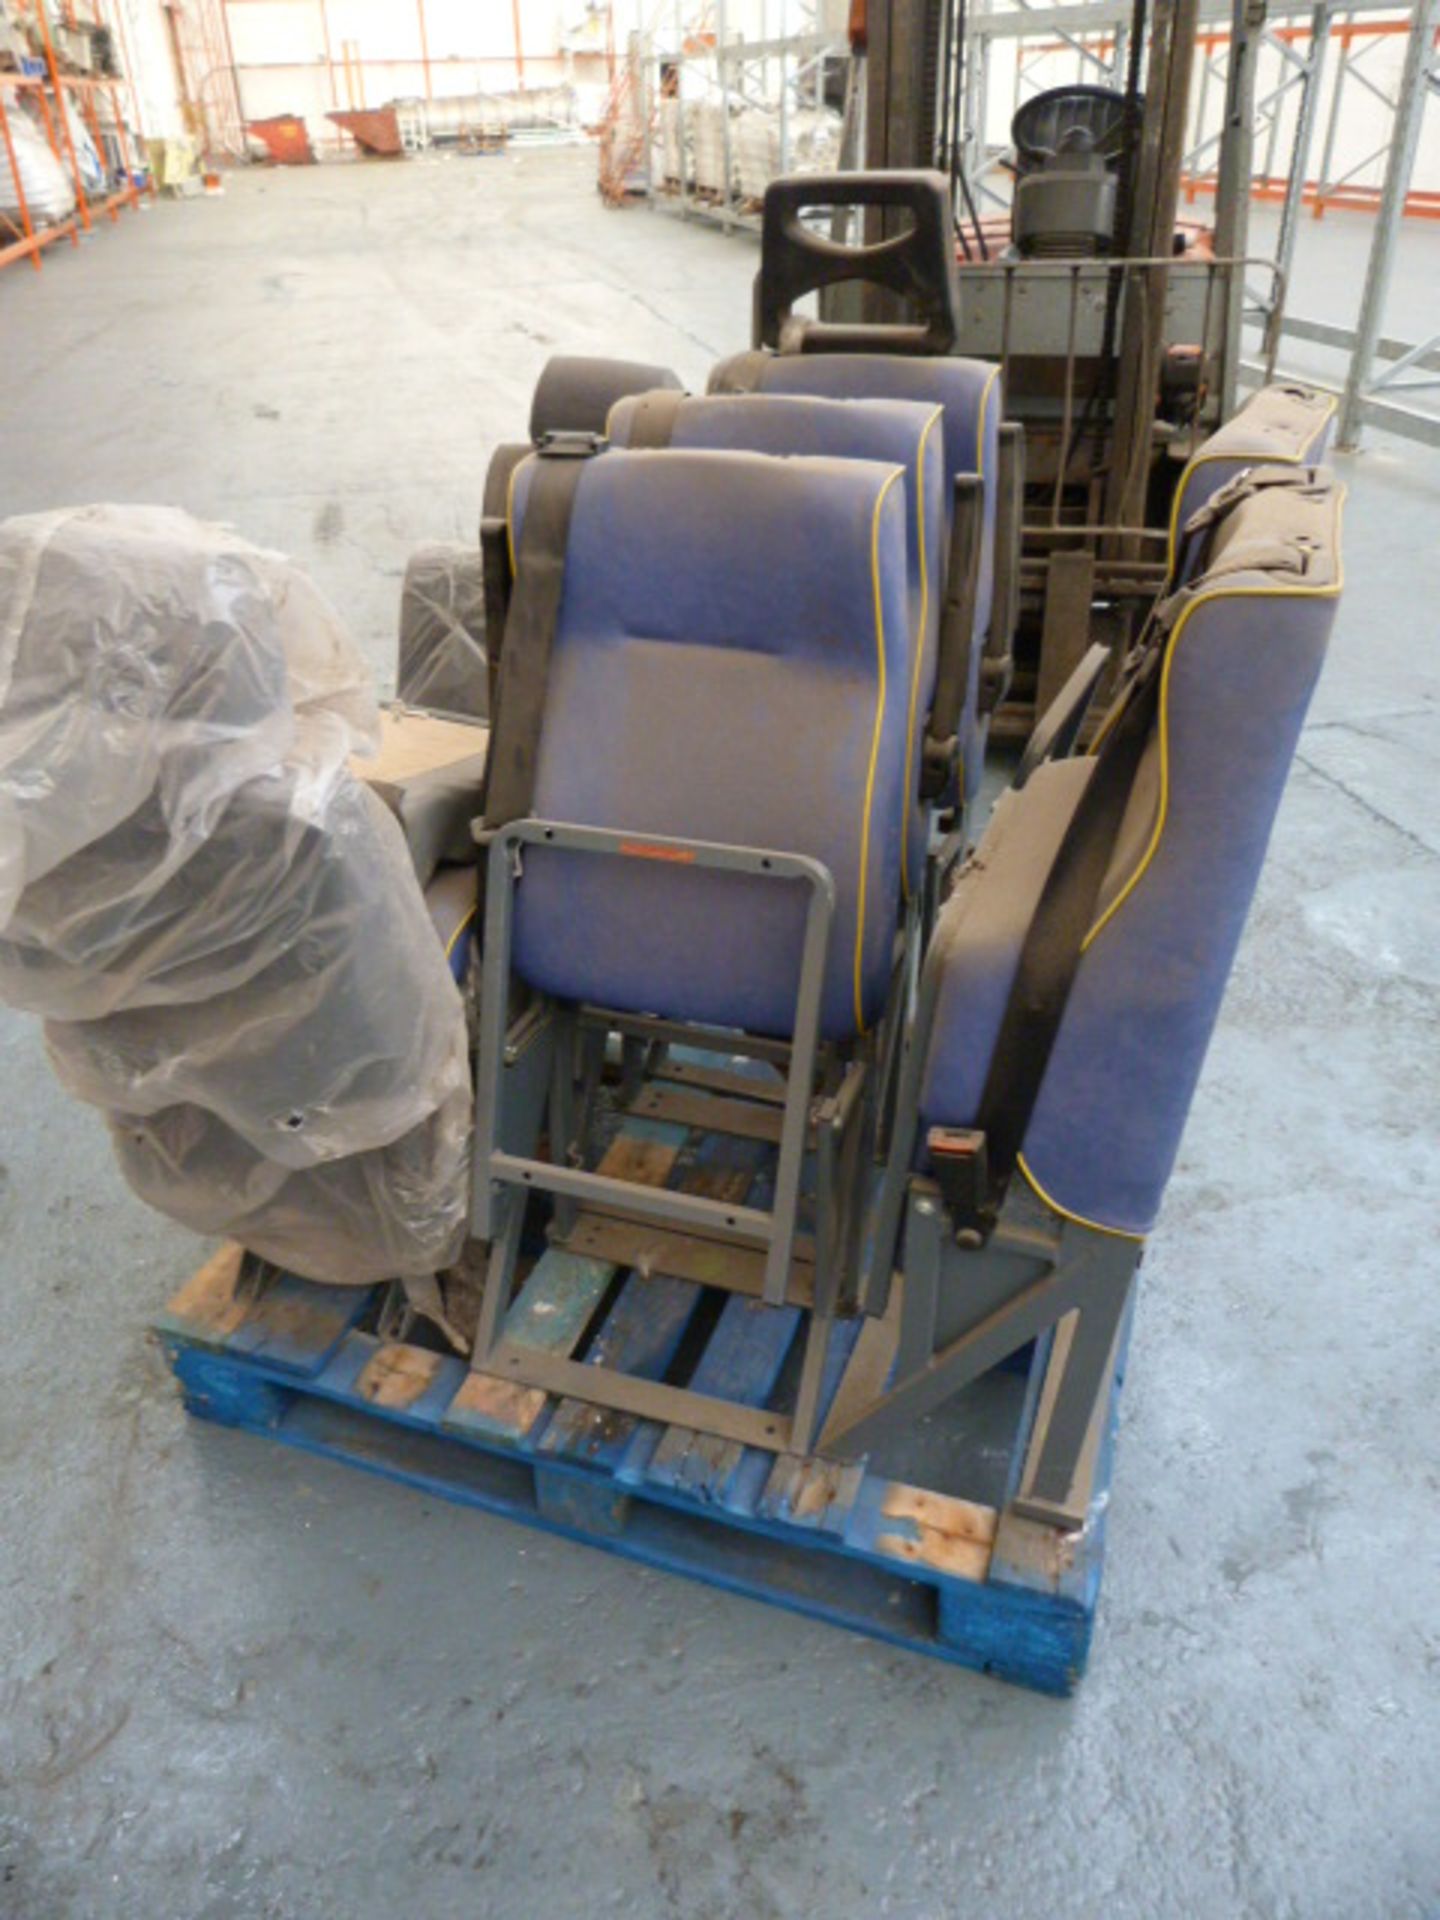 *Pallet Containing Eight Rescroft Minibus Seats with Tilt up Seats and Safety Harnesses